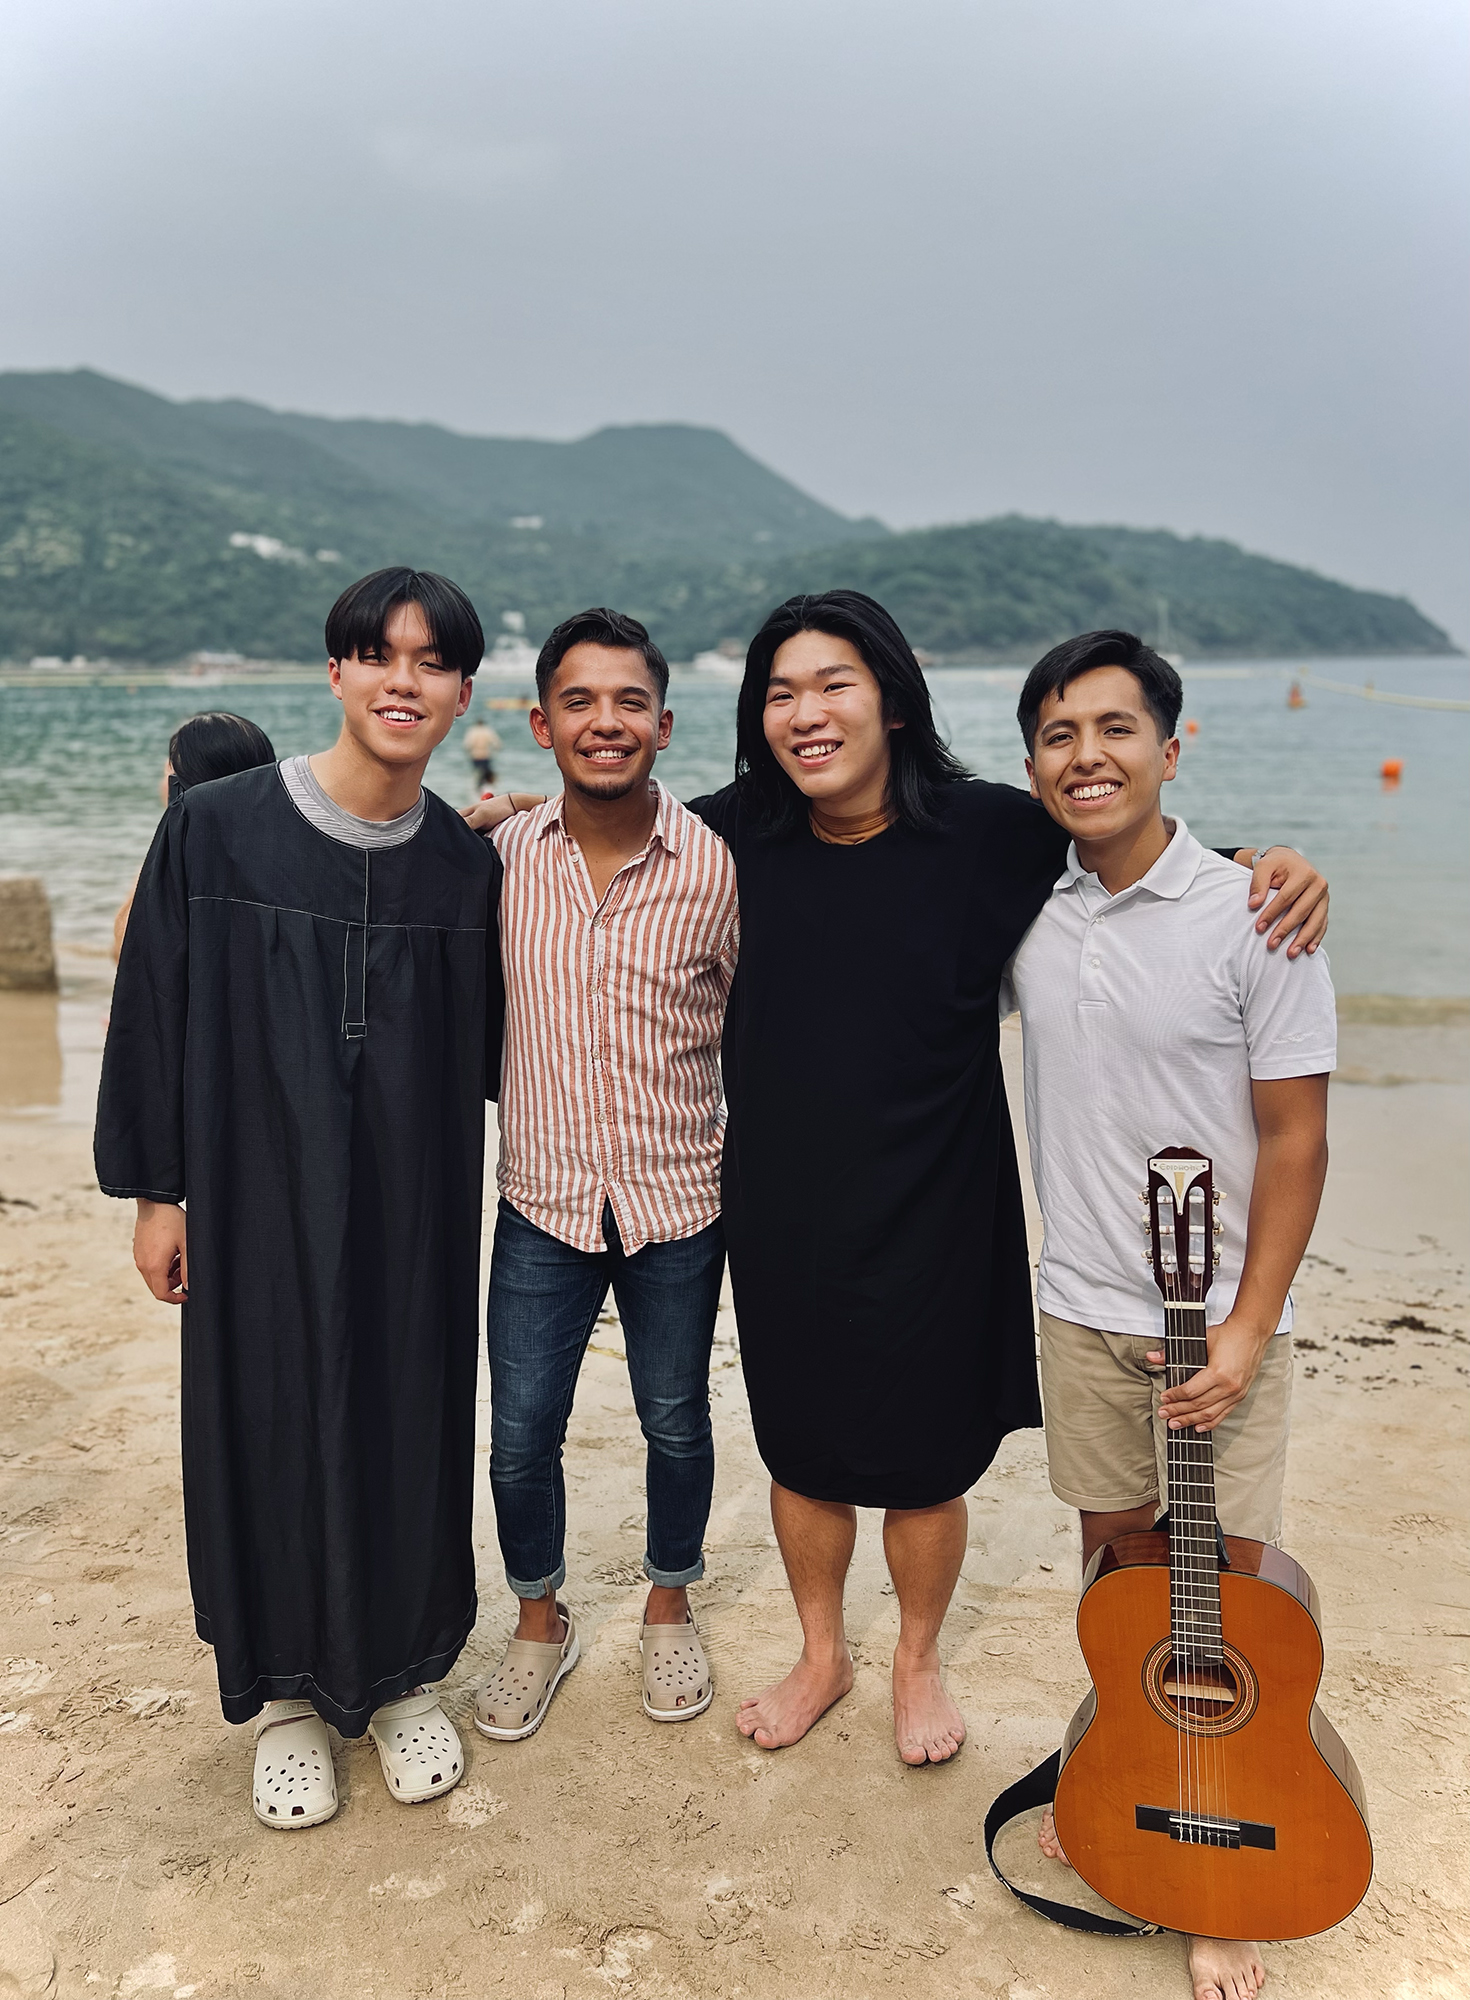 Southern theology majors Edvan Benitez (second from left) and Mauricio Jaldin (right)                                     were thrilled to help lead a number of classmates to Jesus while serving as student missionaries at Hong Kong Adventist College.